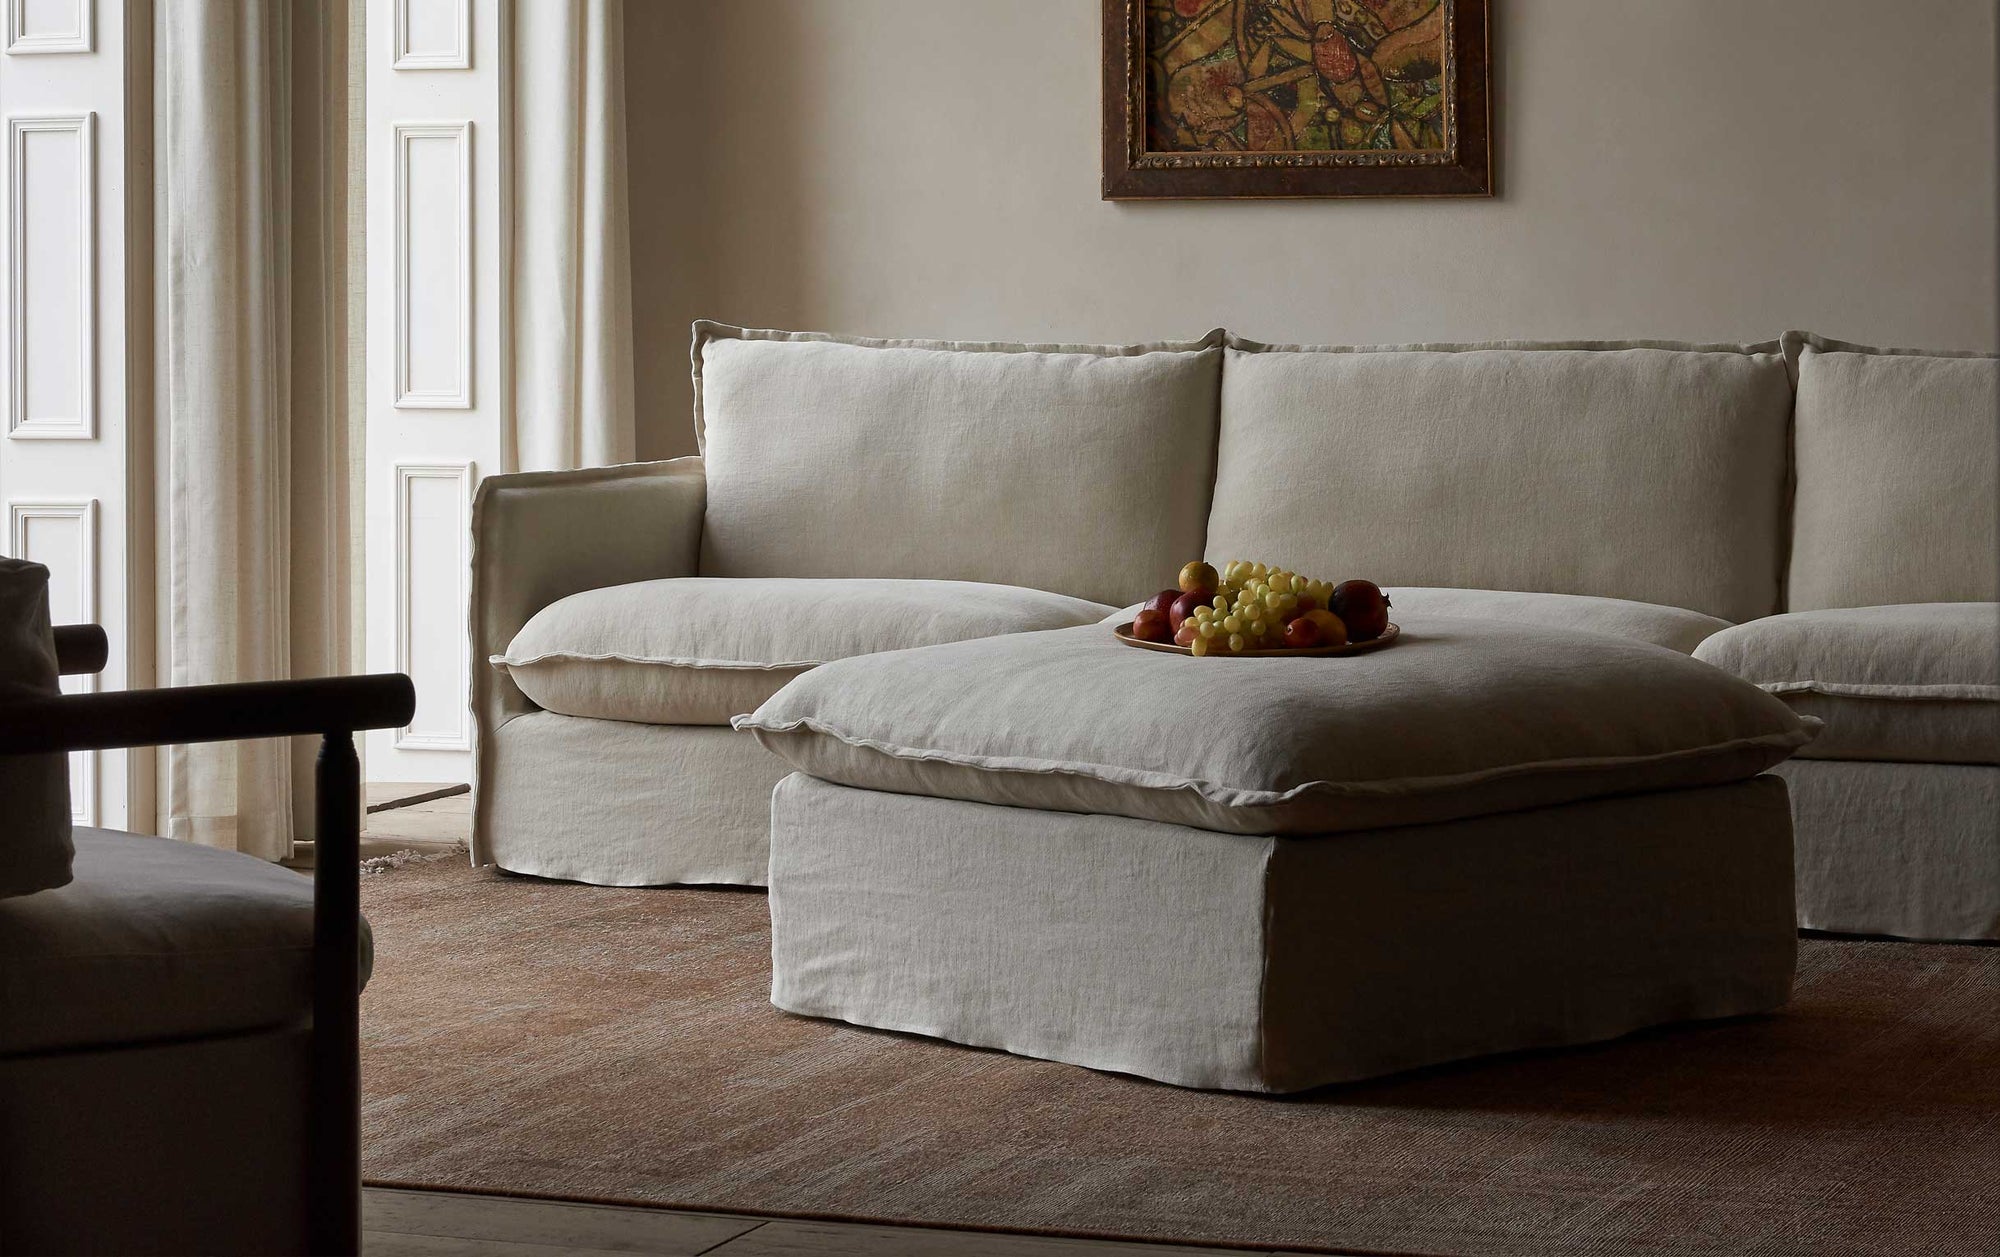 Neva Storage Ottoman in Jasmine Rice, a light warm greige Medium Weight Linen, placed in a decorated room in front of a Neva Sectional Sofa, with a tray of grapes on top